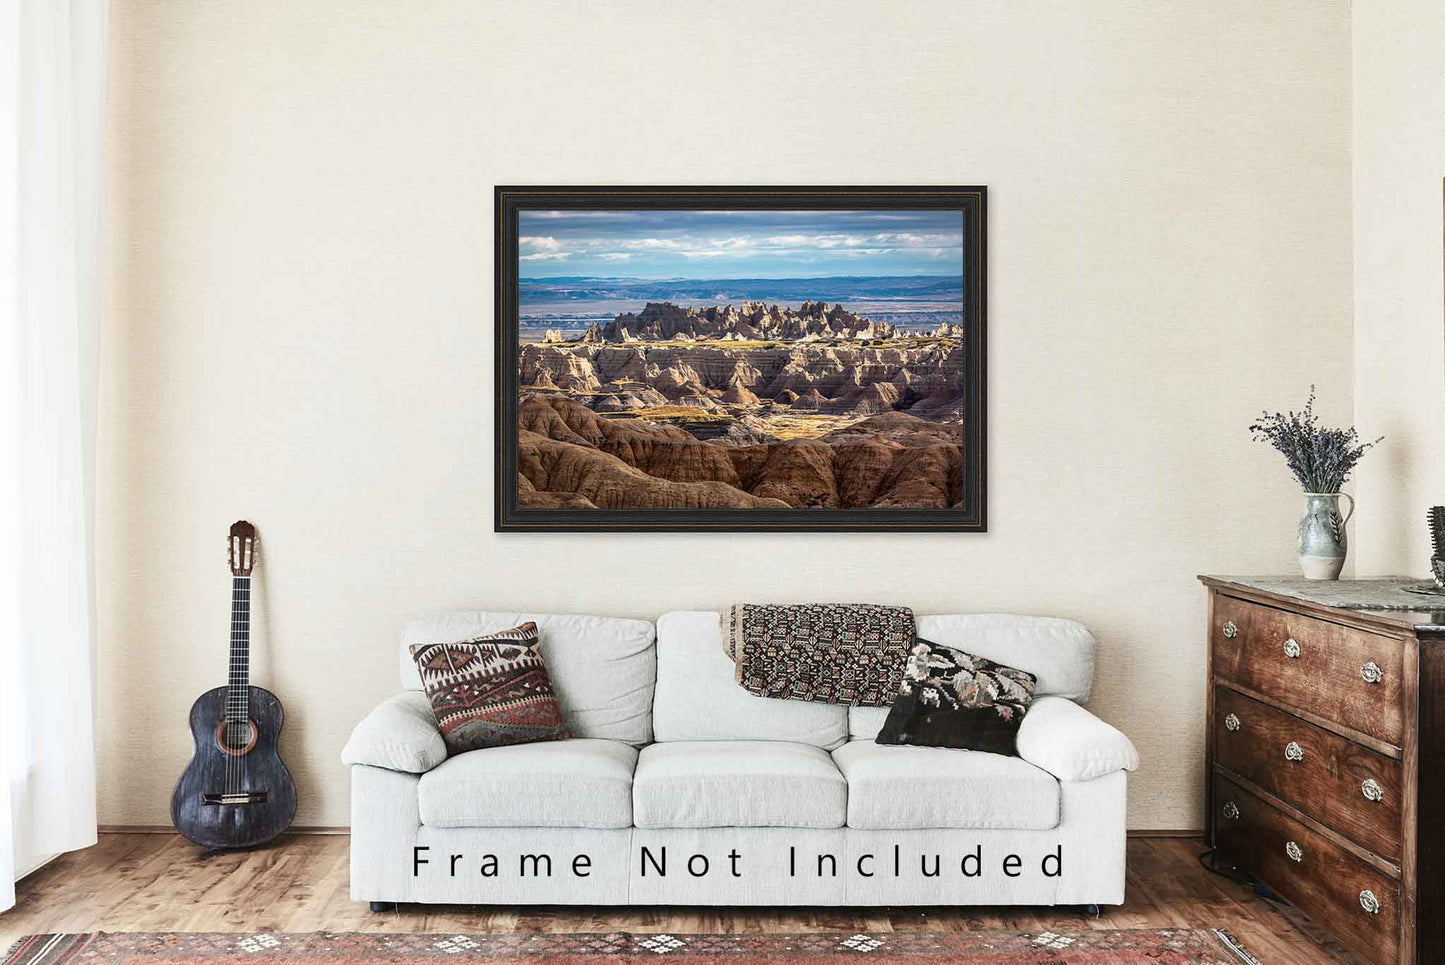 Landscape Photography Print - Wall Art Picture of Spires in South Dakota Badlands on Autumn Day Great Plains Photo Decor 5x7 to 40x60